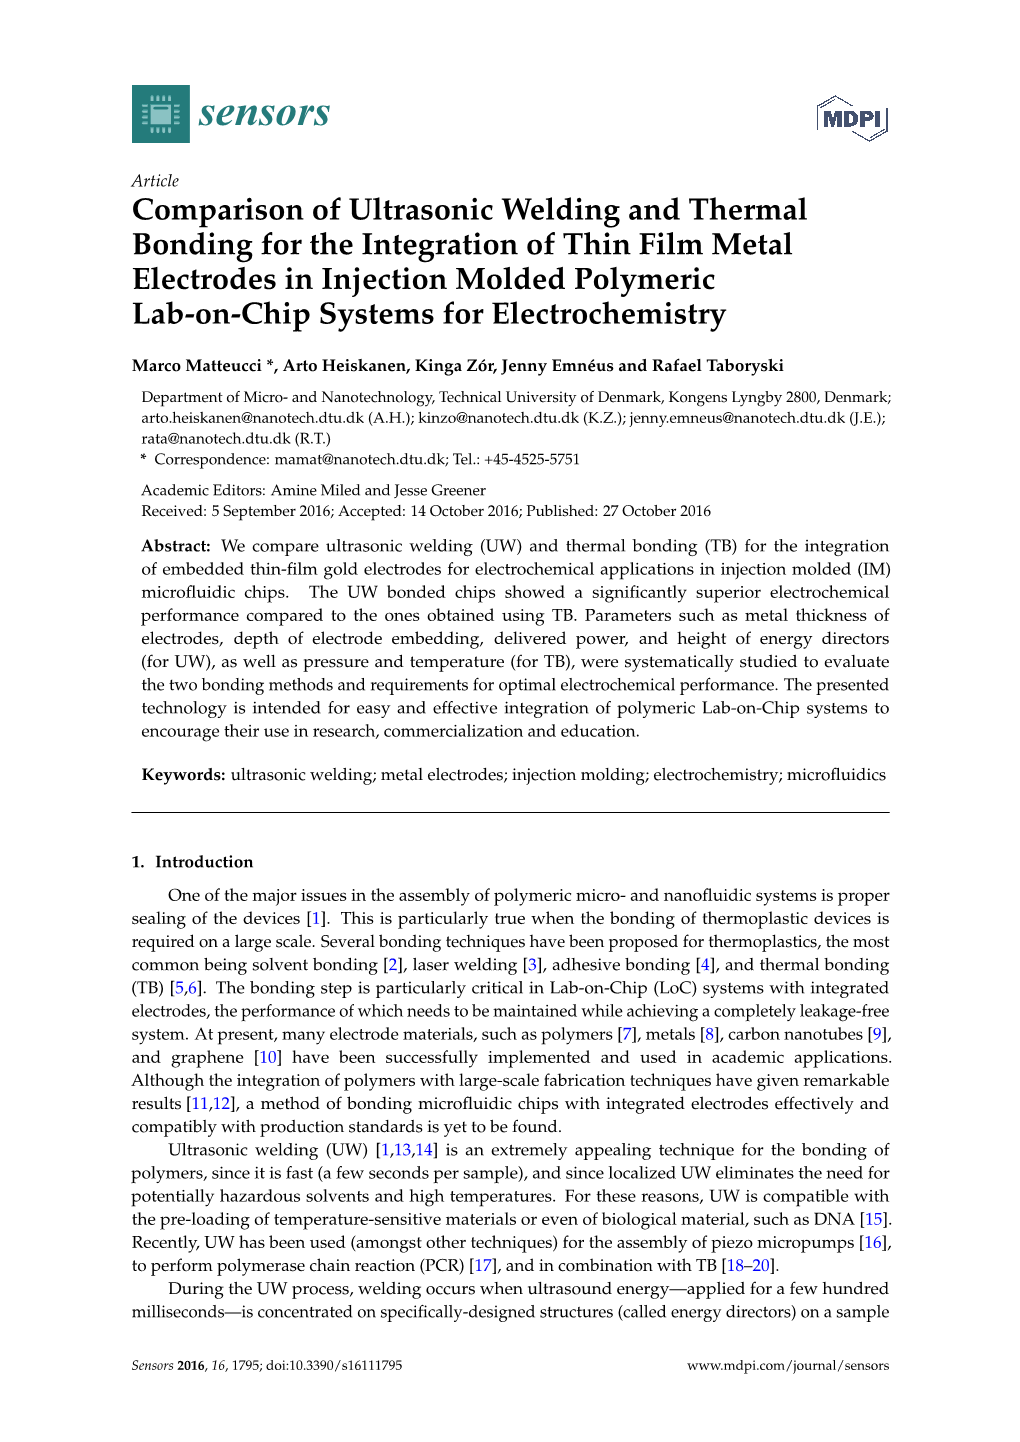 Comparison of Ultrasonic Welding and Thermal Bonding for The